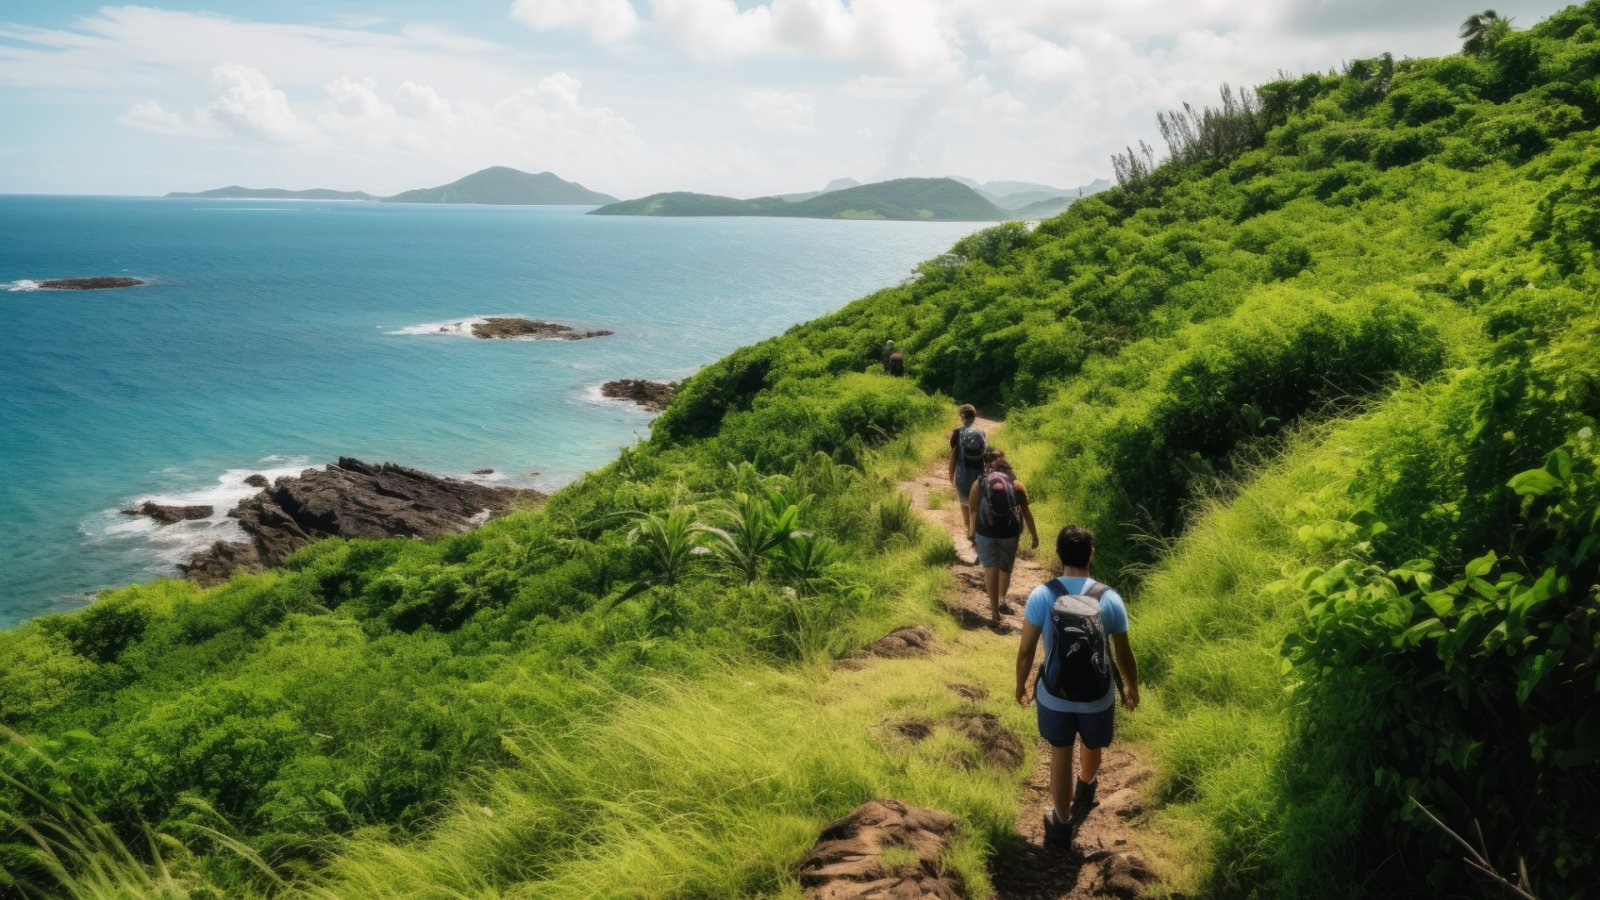 Embark on a breathtaking hike to experience the beauty of St. Barths